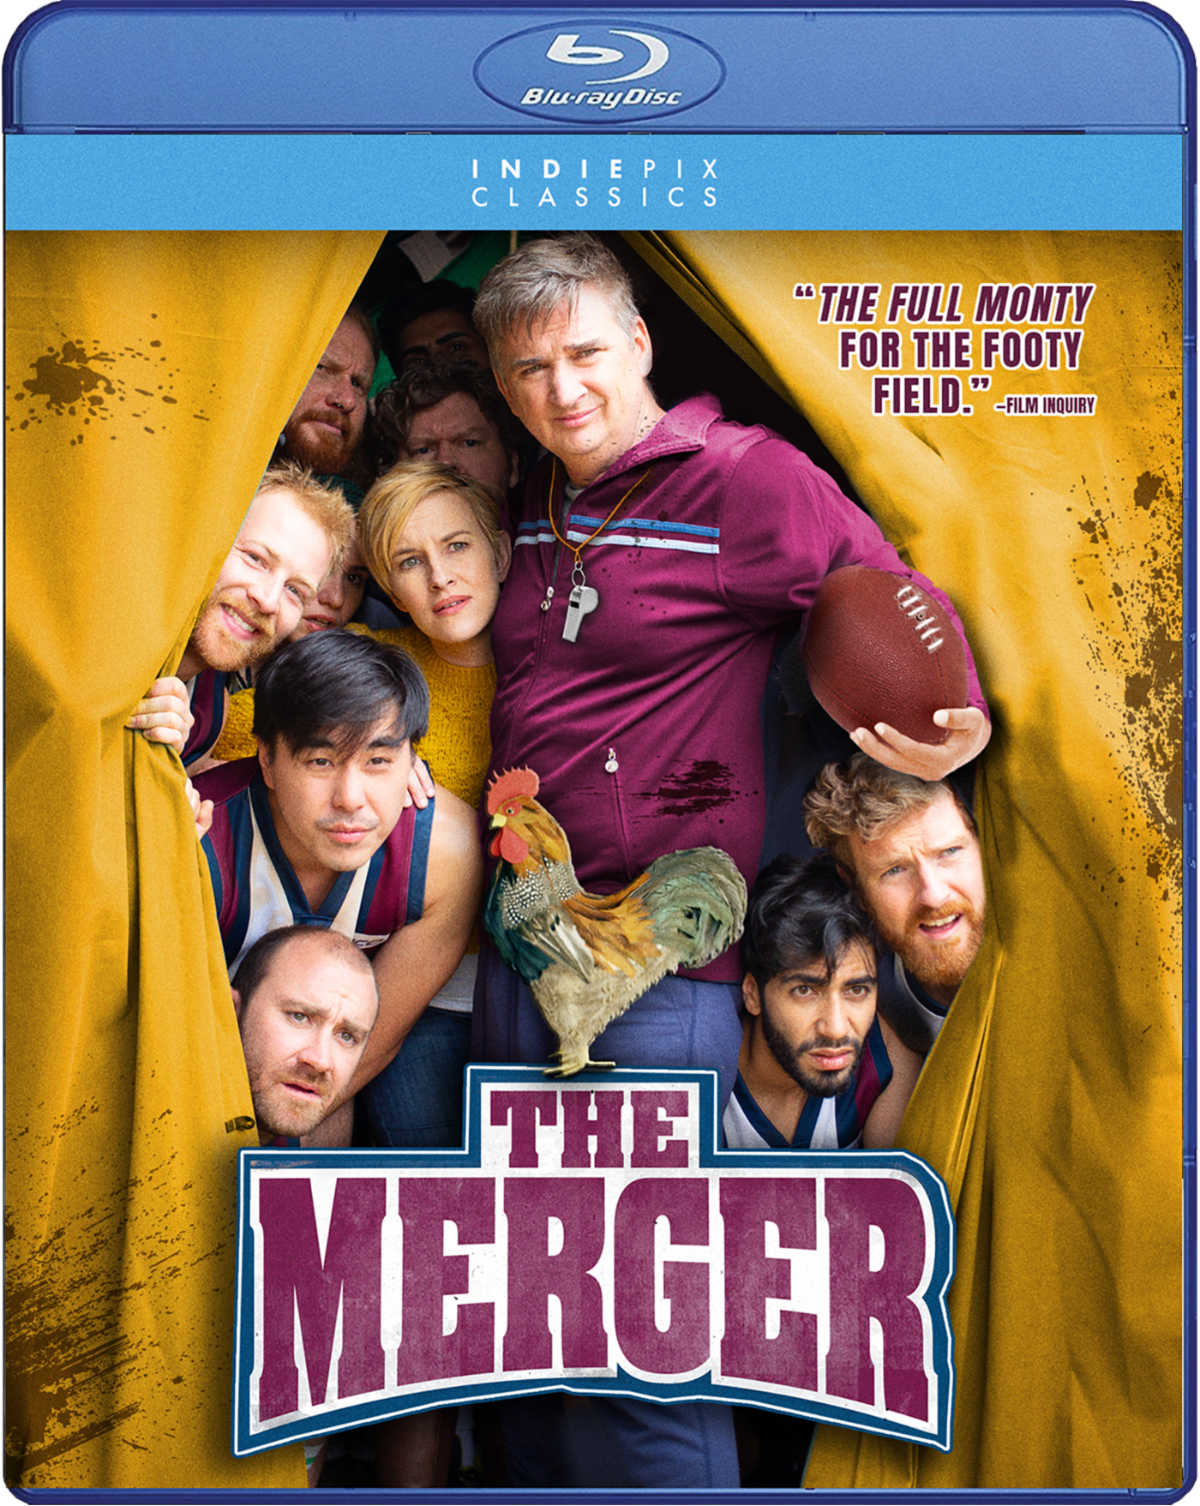 The Merger is an independent Australian film that is sure to entertain the whole family. Set in a small, economically challenged rural community, this film features a diverse cast of characters.